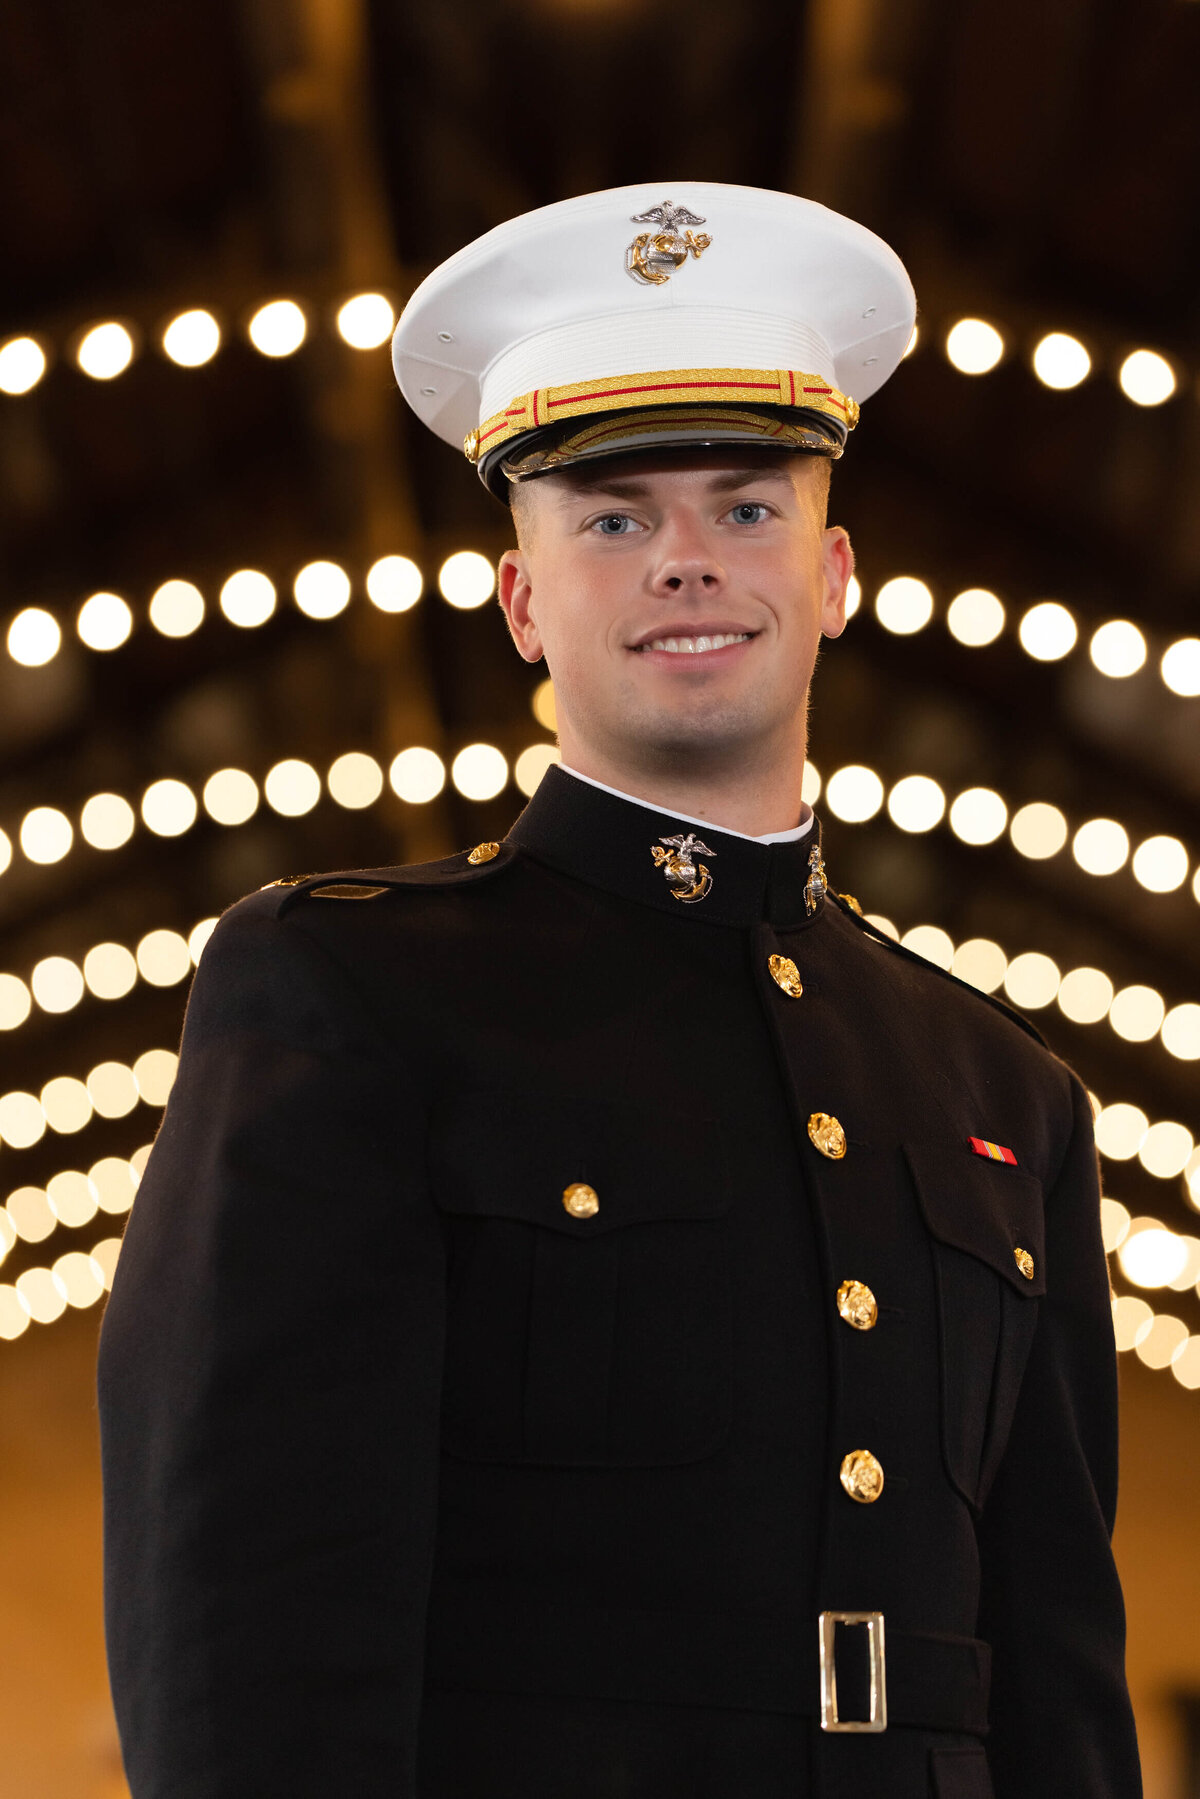 Senior photos in Dhalgren Lights at the Naval Academy.